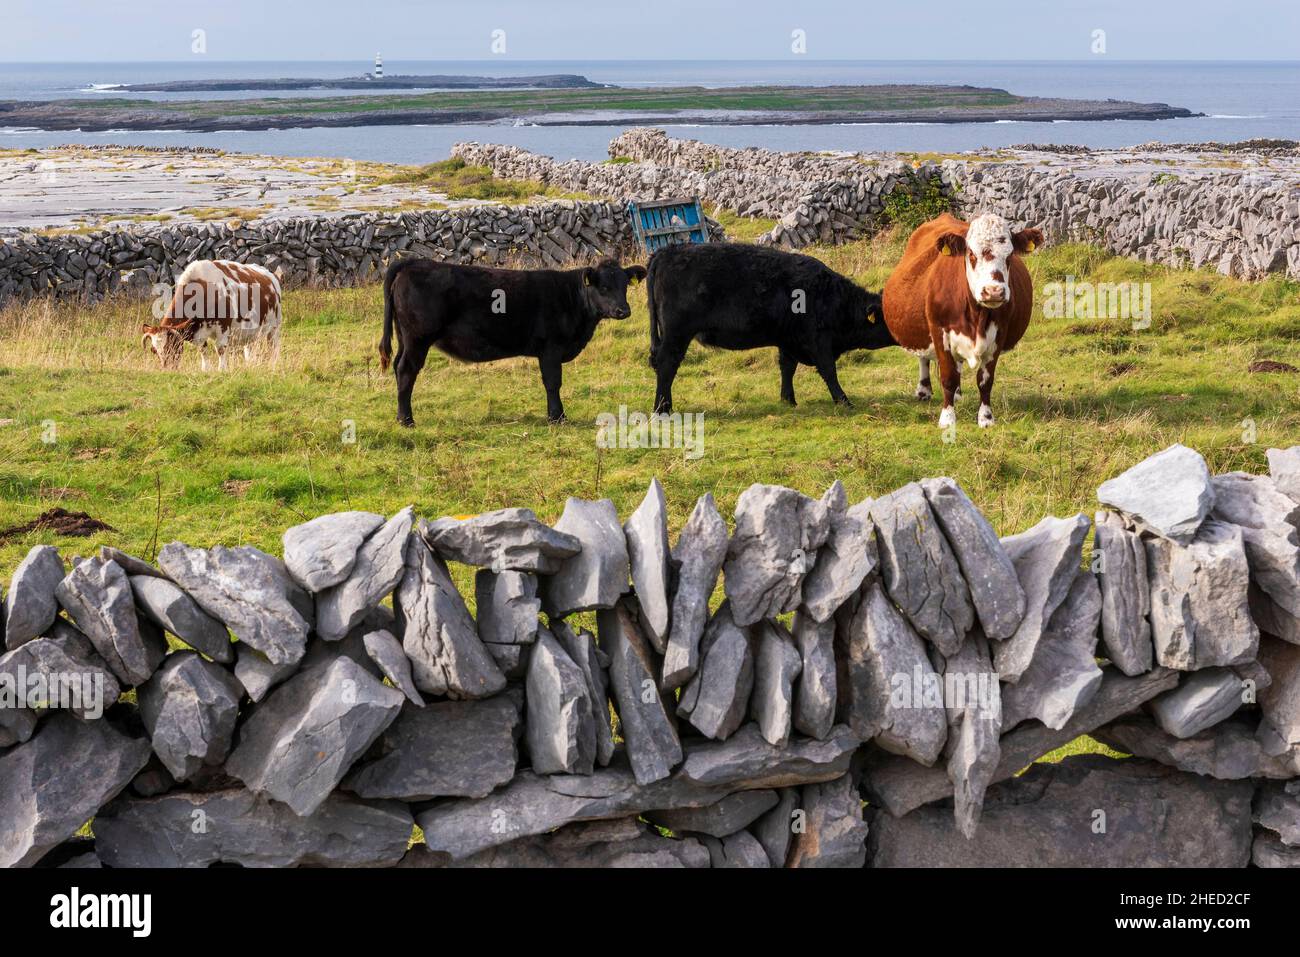 Ireland, County Galway, Aran Islands, Inishmore Island, cows in the pasture fields surrounded by dry stone walls Stock Photo